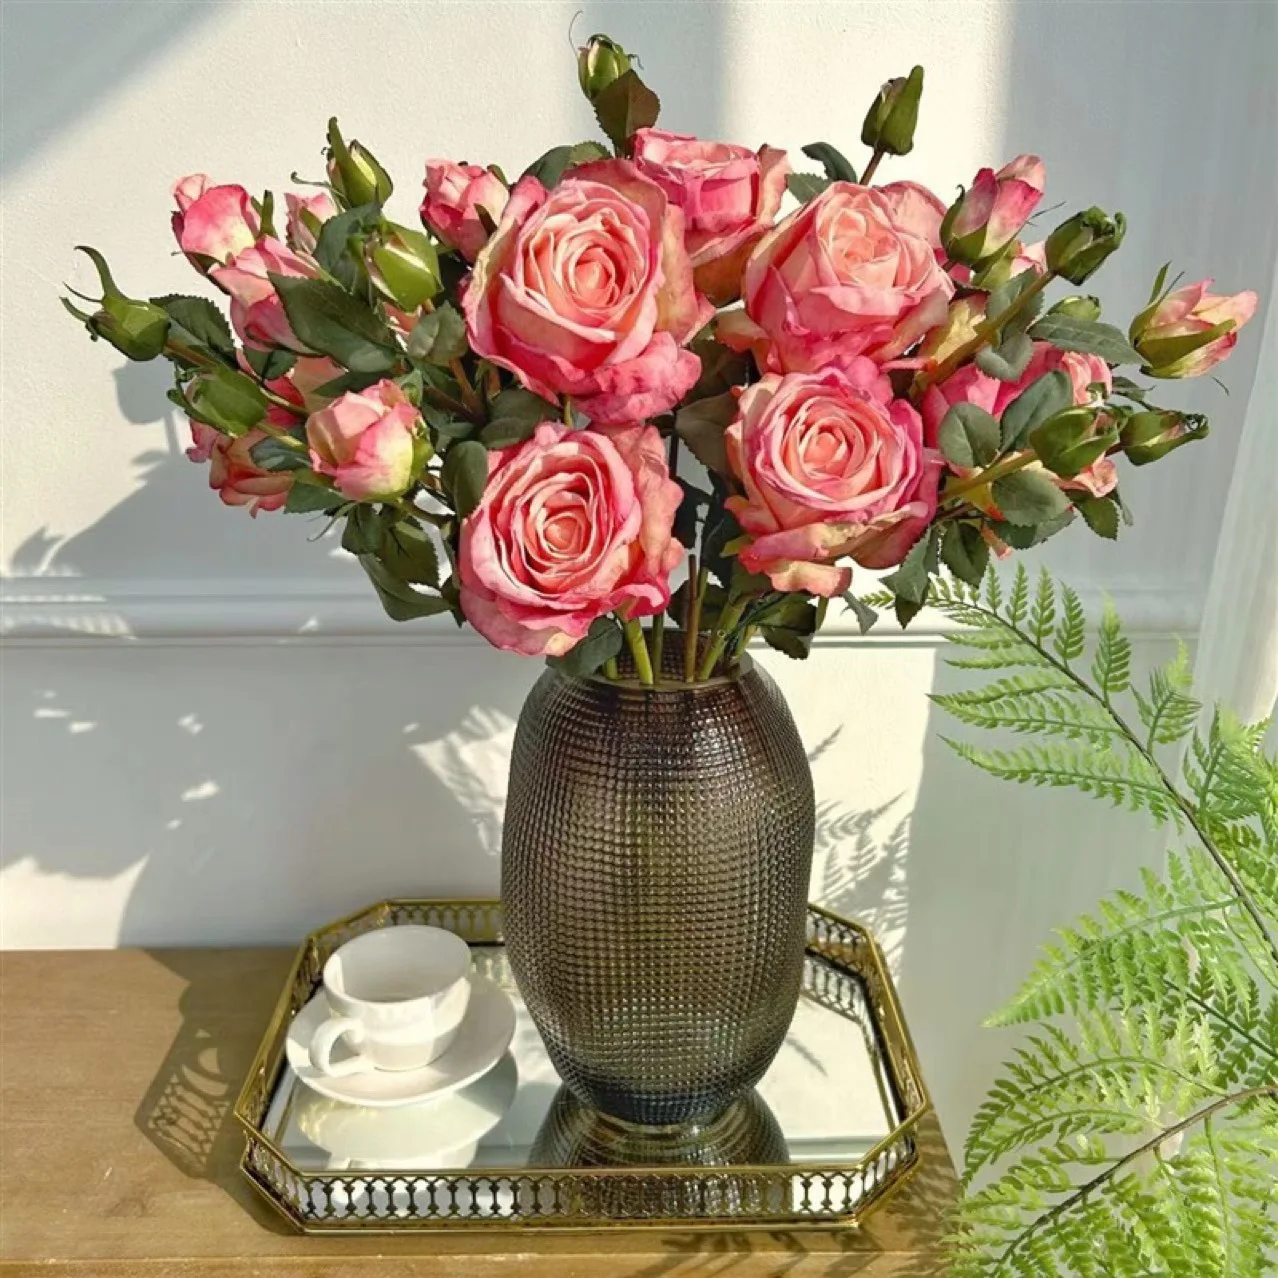 

Vintage Simulation Flowers Greek Roses Living Room Fake Flowers Decorative Flowers Ornaments Soft Decoration Dried Flowers Roses